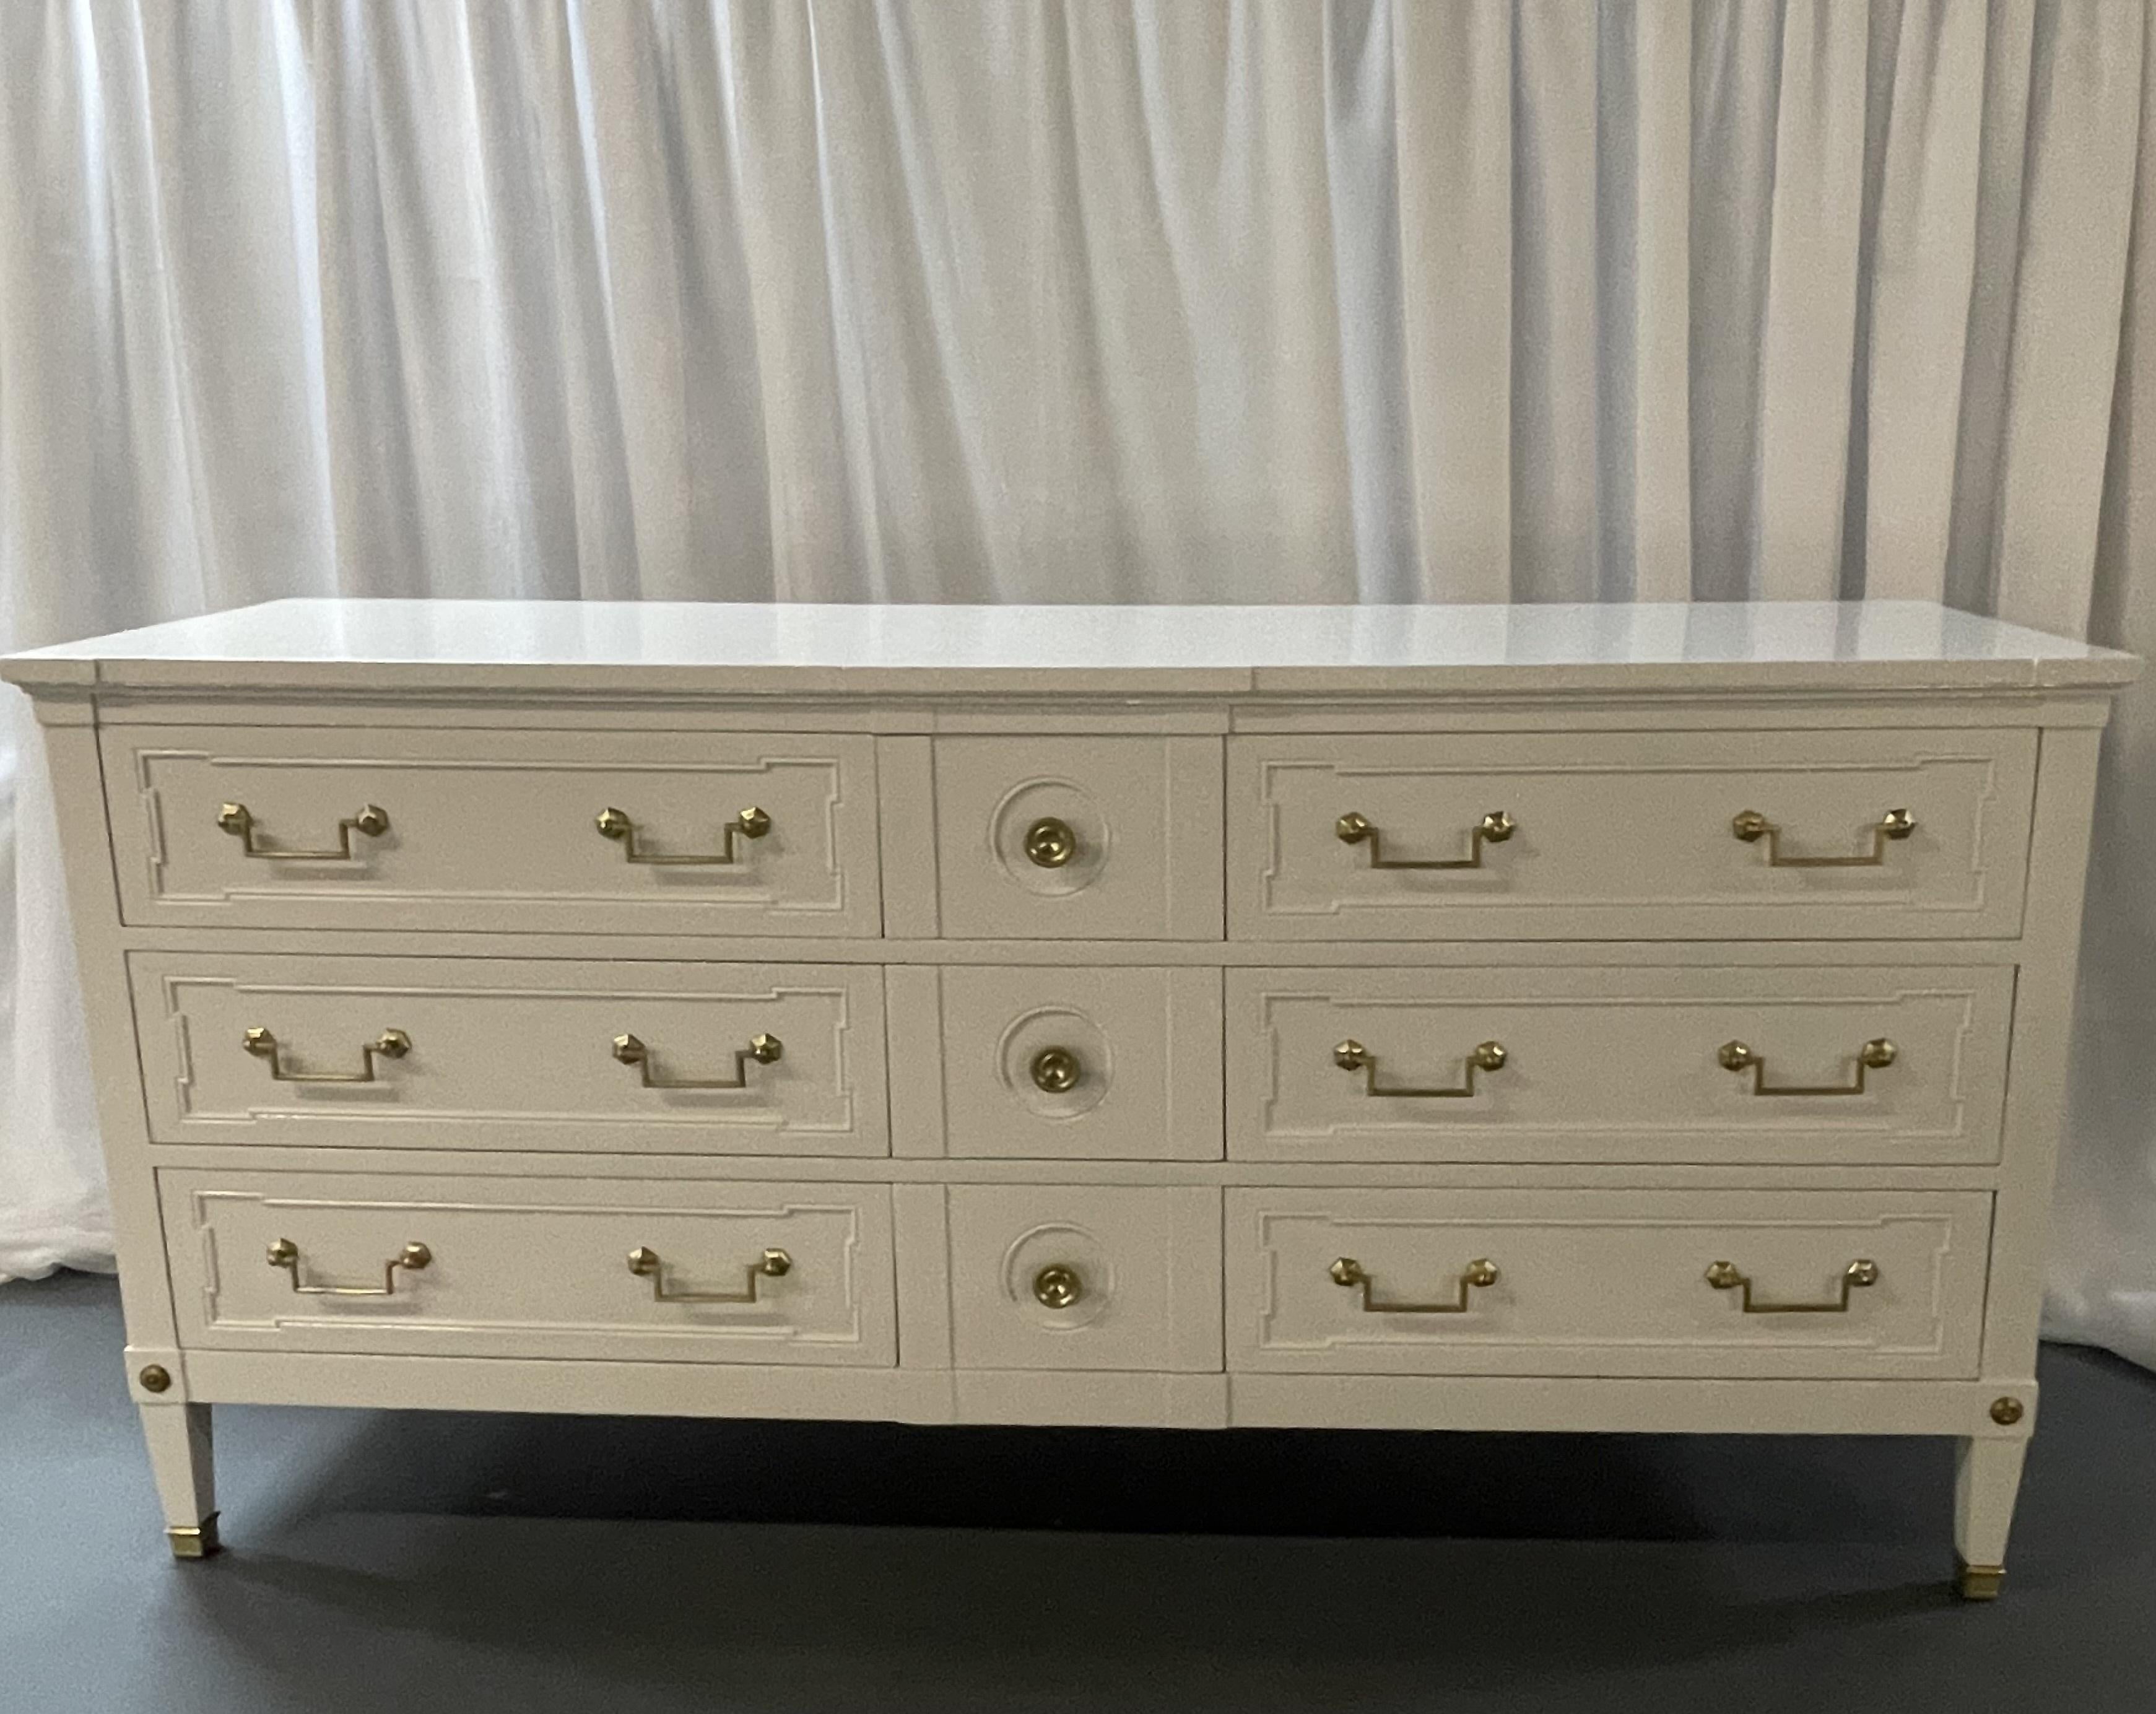 Maison Jansen Style Mid Century Modern Dresser or Sideboard, White Lacquer
A fully refinished white lacquered bronze mounted dresser in the manner of Maison Jansen. Having three center drawers flanked by three larger drawers all with bronze draw a